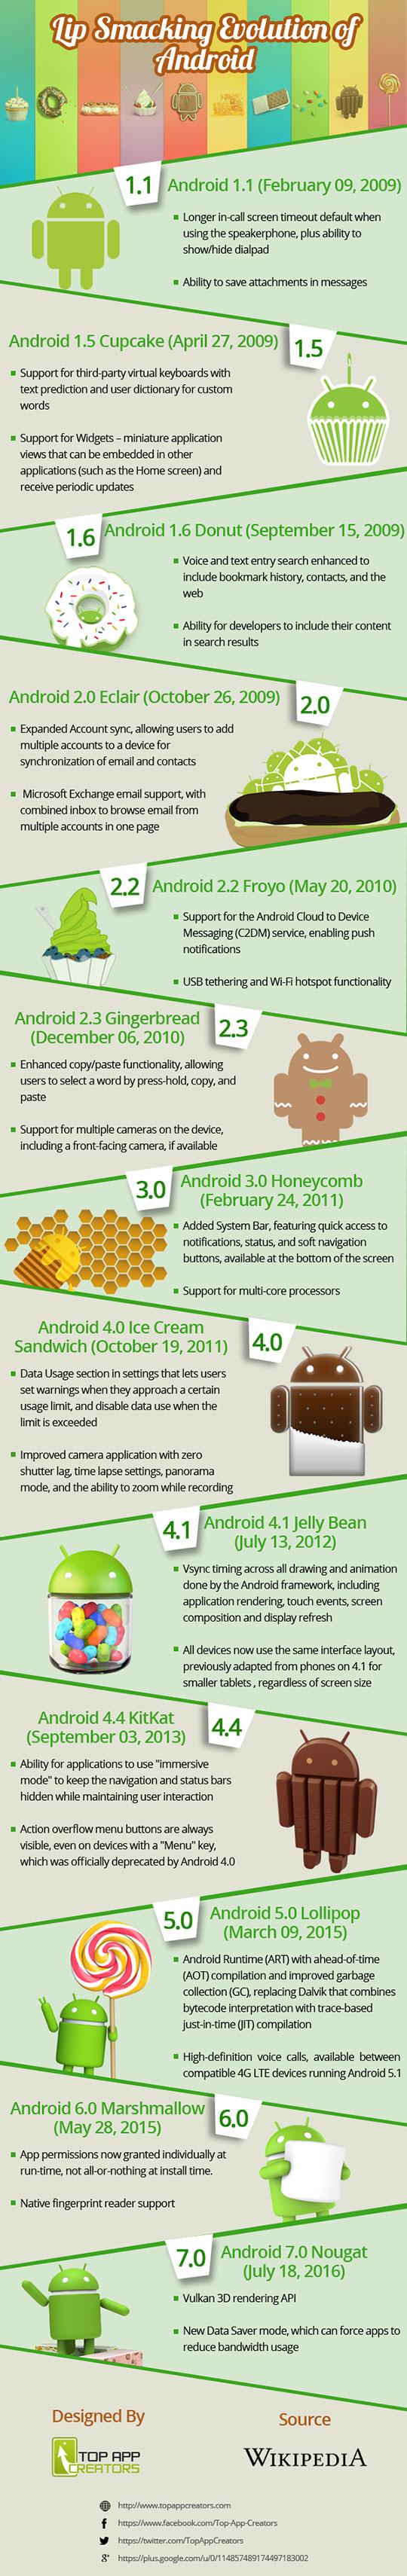 Android Evolution - Lip Smacking Evolution Of Android (Infographic)